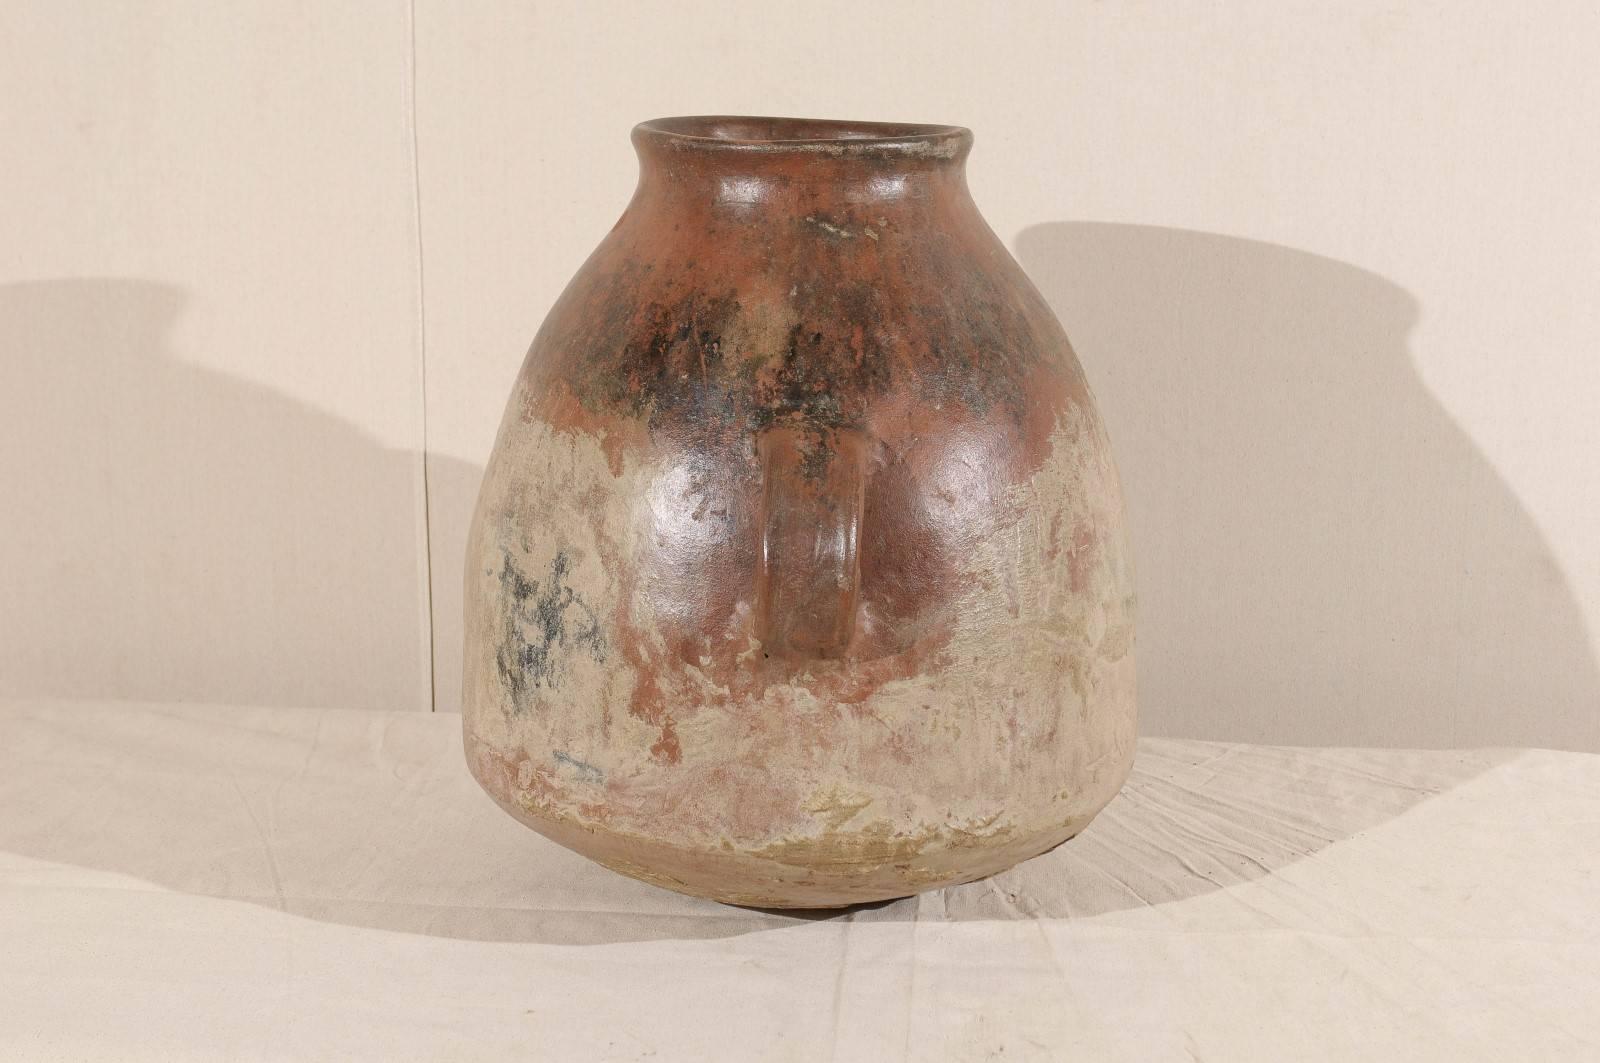 Patinated Mid-19th Century Spanish Colonial Jar with Two Handles, Made of Clay